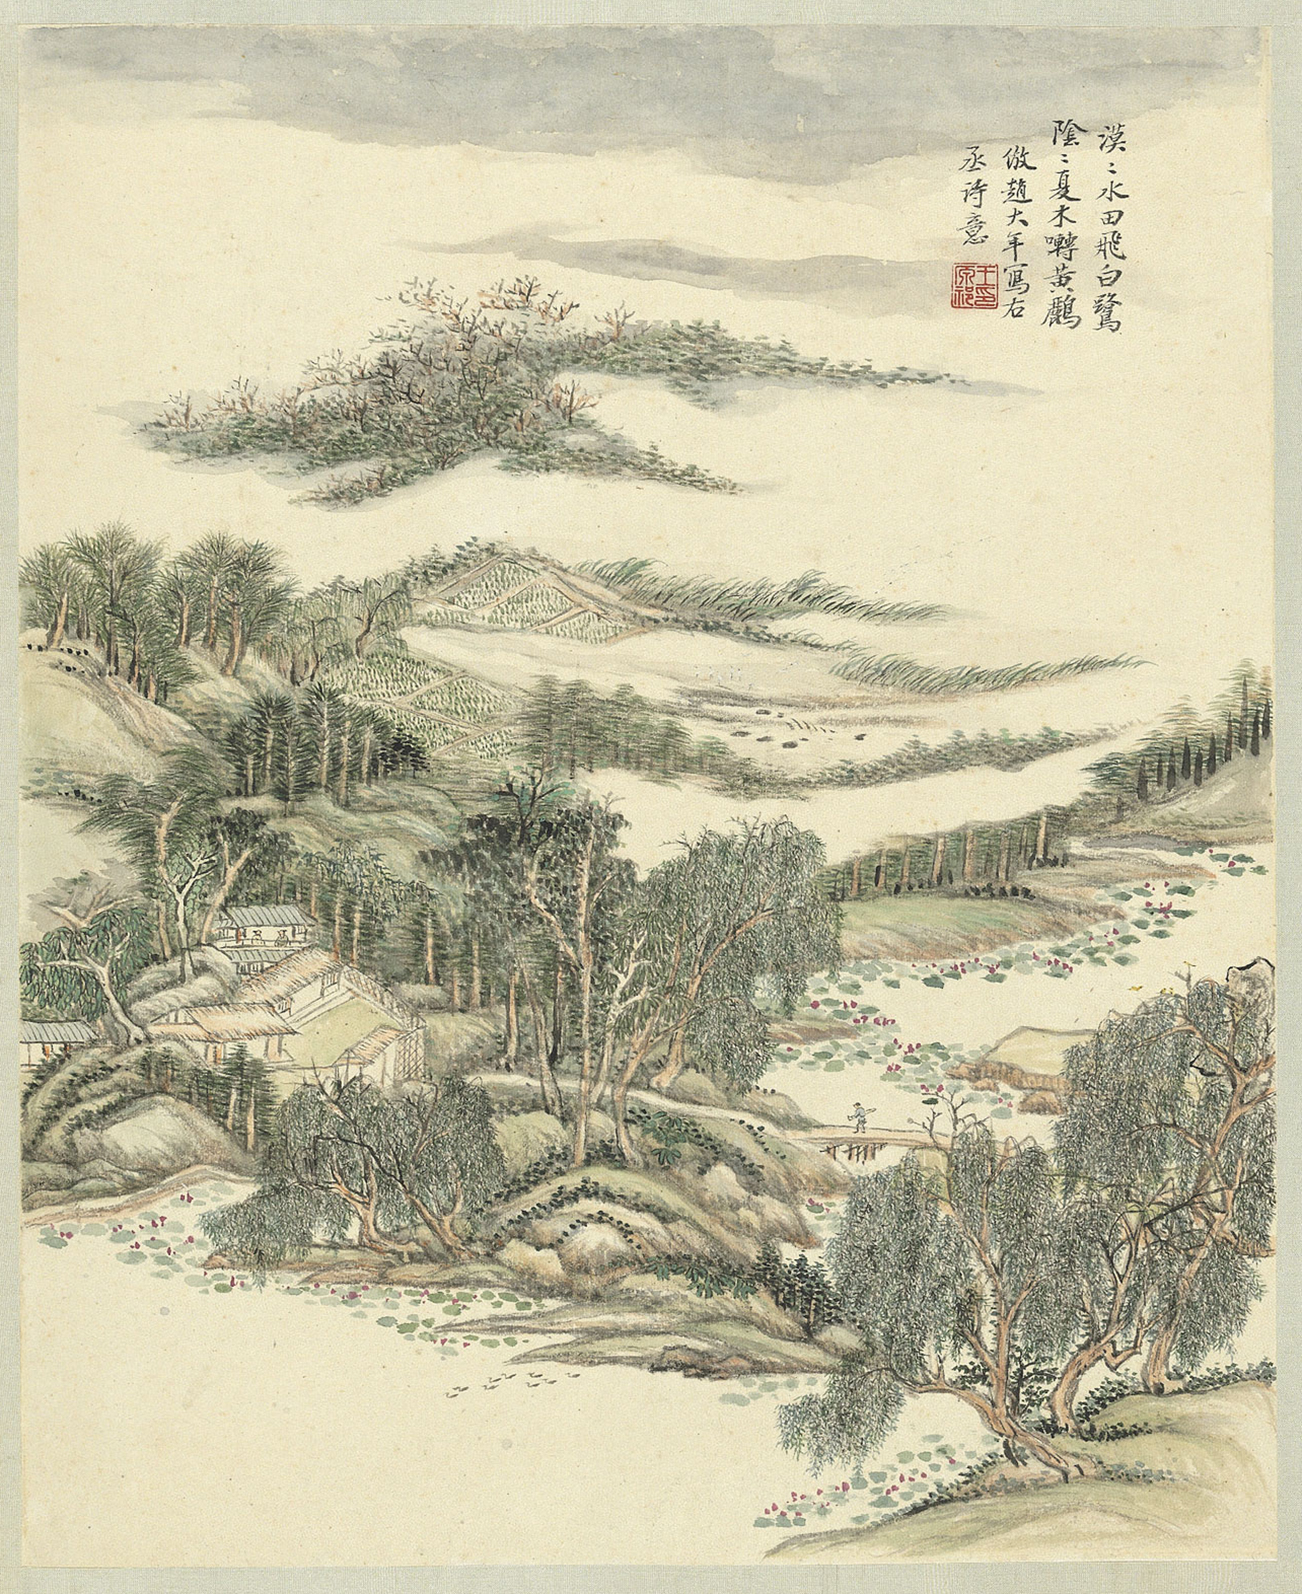 Lotuses and Willows Among Mountain Fields